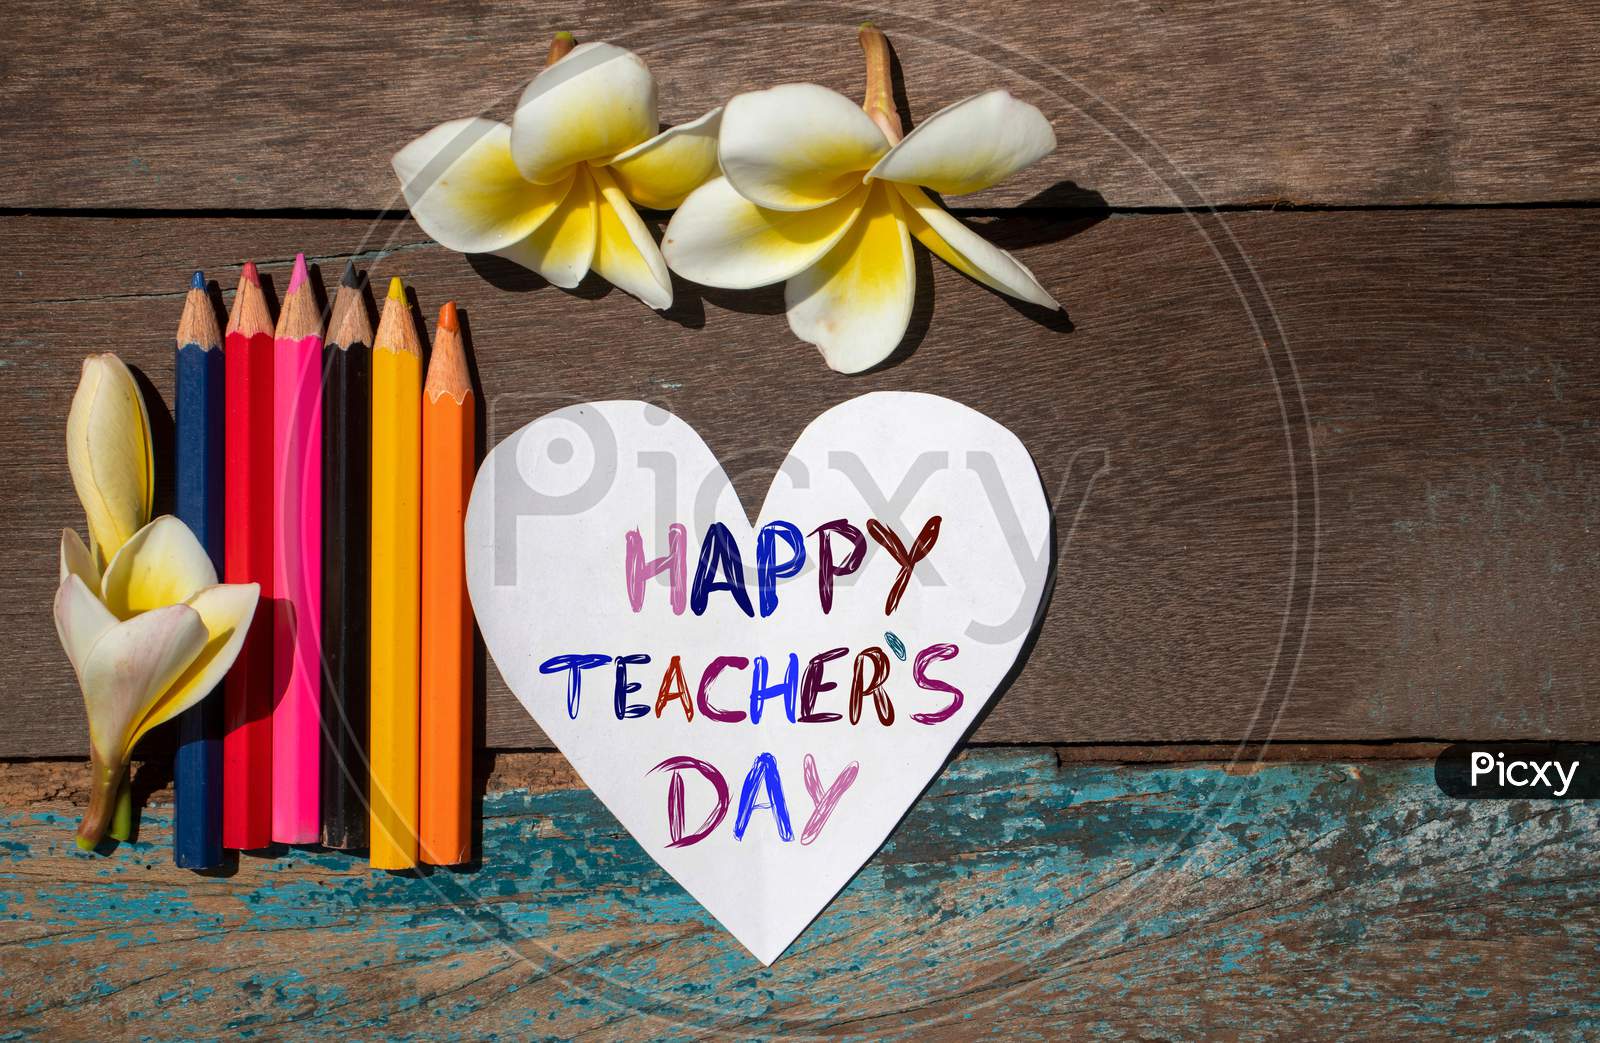 Happy Teacher'S Day Wish Written On Heart Shaped Paper Note With Color Pencils And Plumeria Flowers On Wooden Background, Perfect For Wallpaper